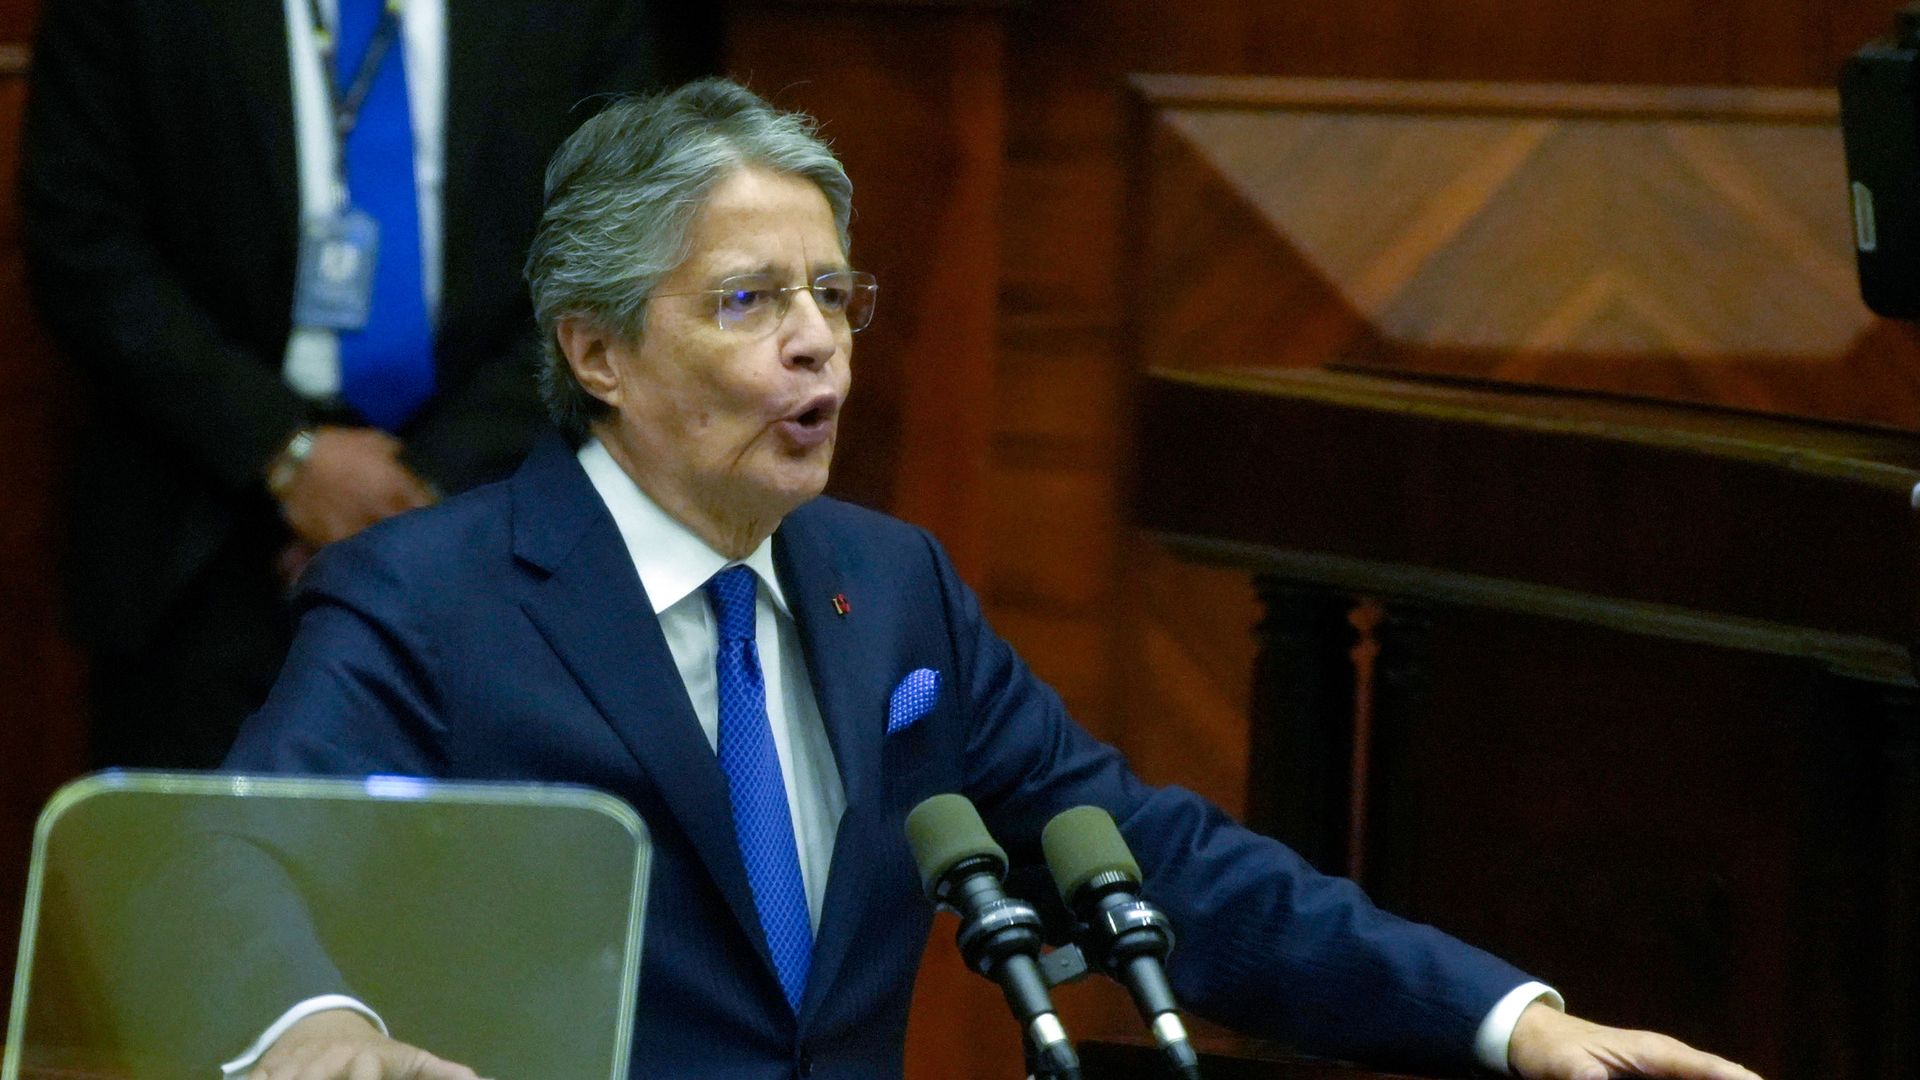 Ecuador's President Guillermo Lasso fights for political survival as  impeachment trial looms